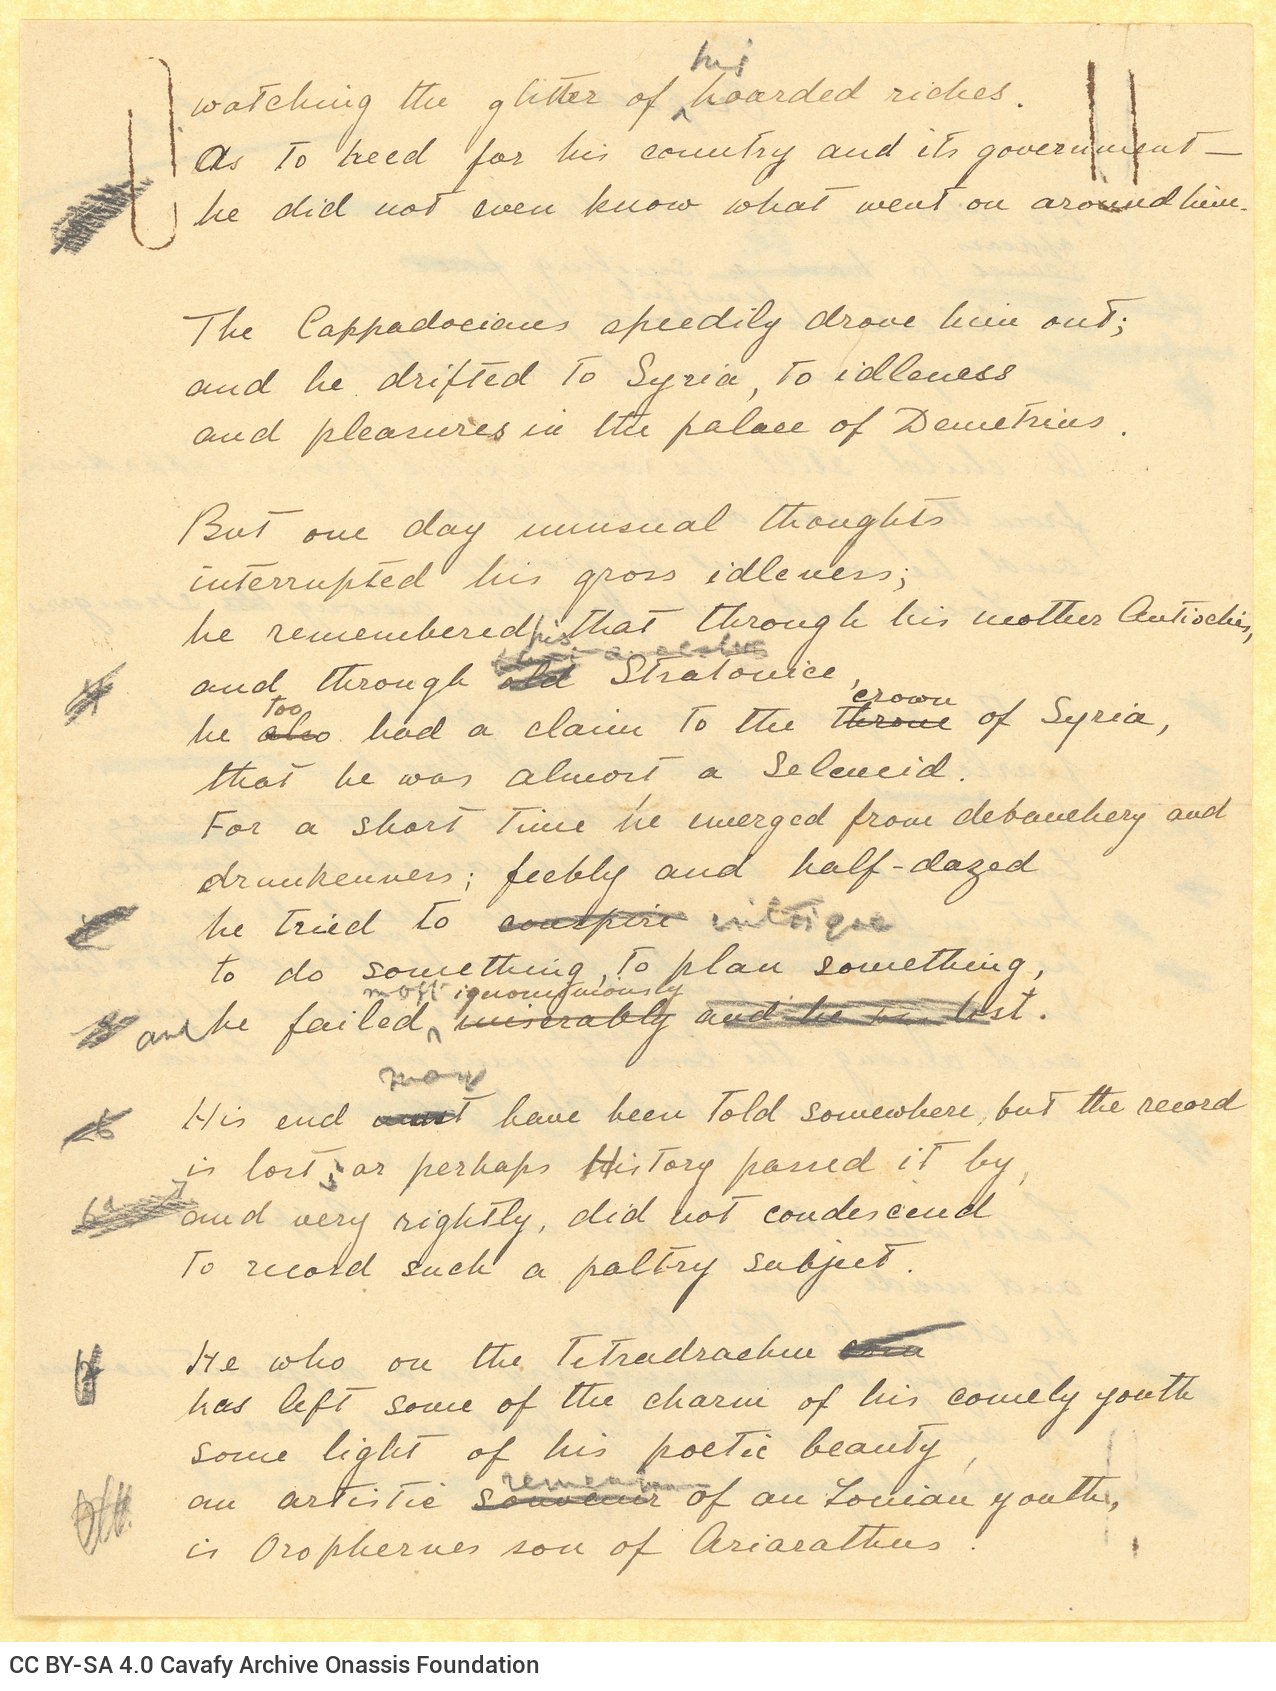 Handwritten English translation of the poem "Orophernes" by G. Valassopoulo on both sides of a sheet, with handwritten can